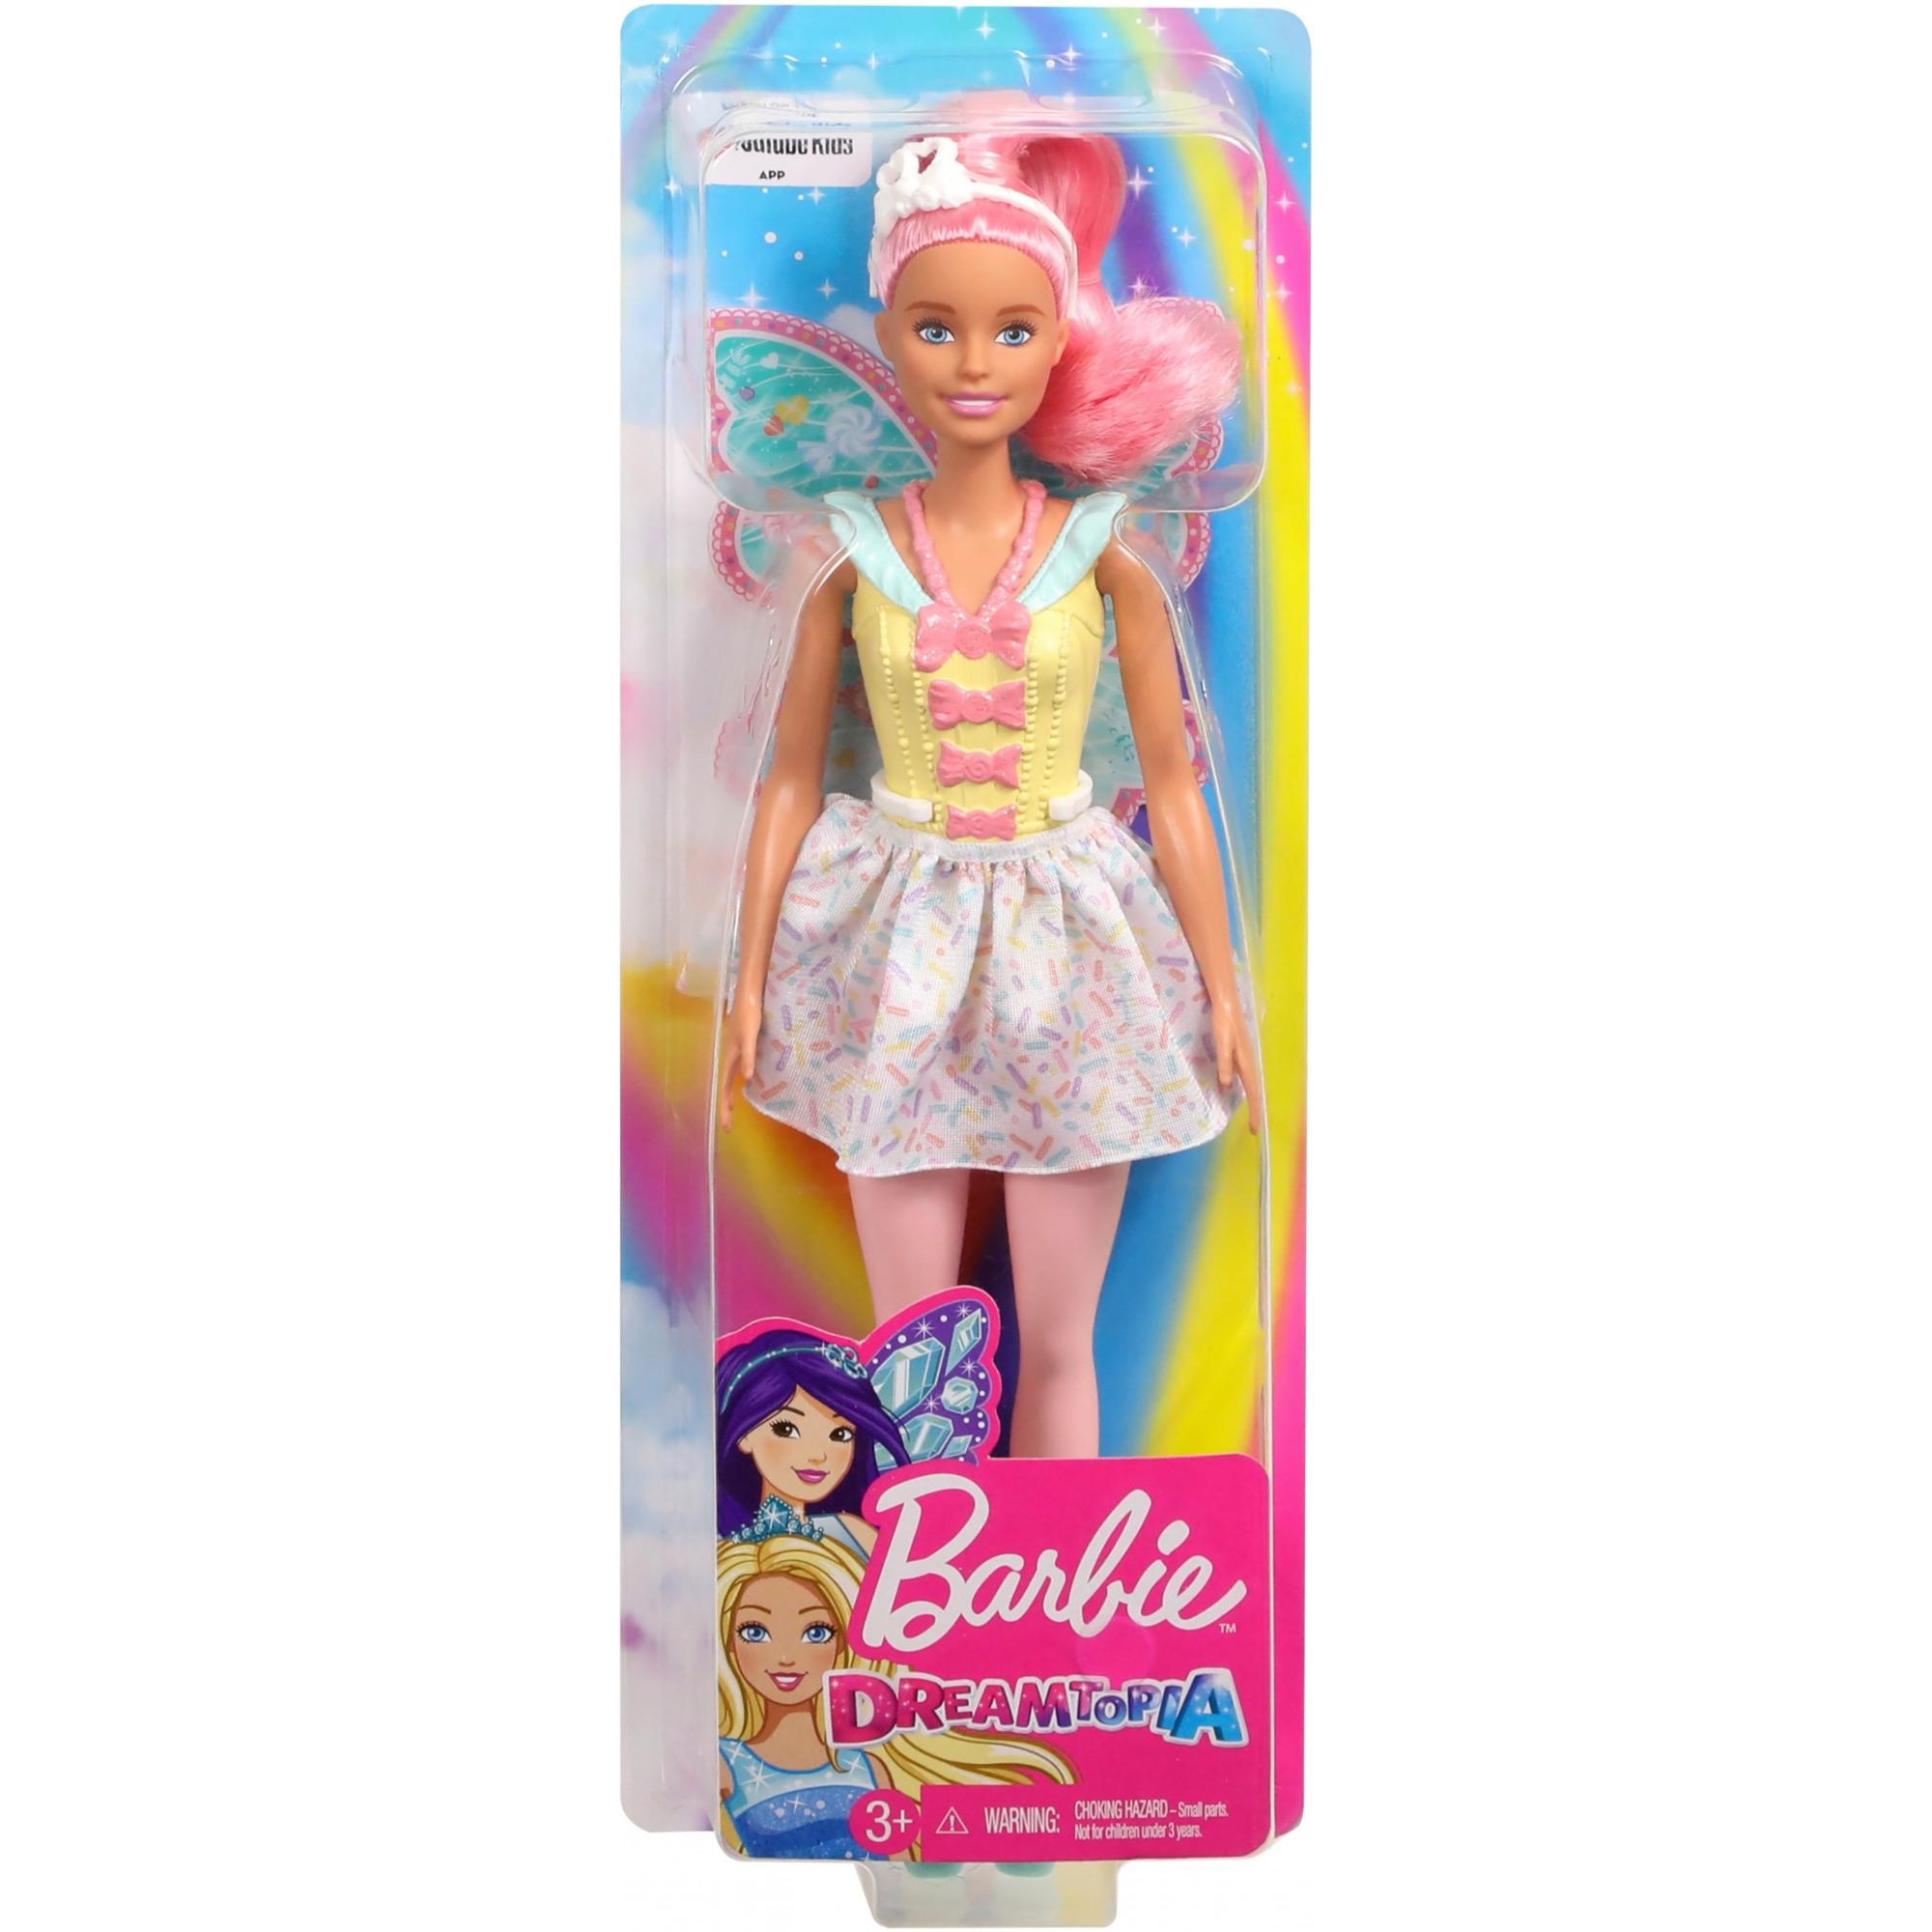 Barbie Dreamtopia Fairy Doll, Pink Hair & Candy-Decorated Wings - image 8 of 8